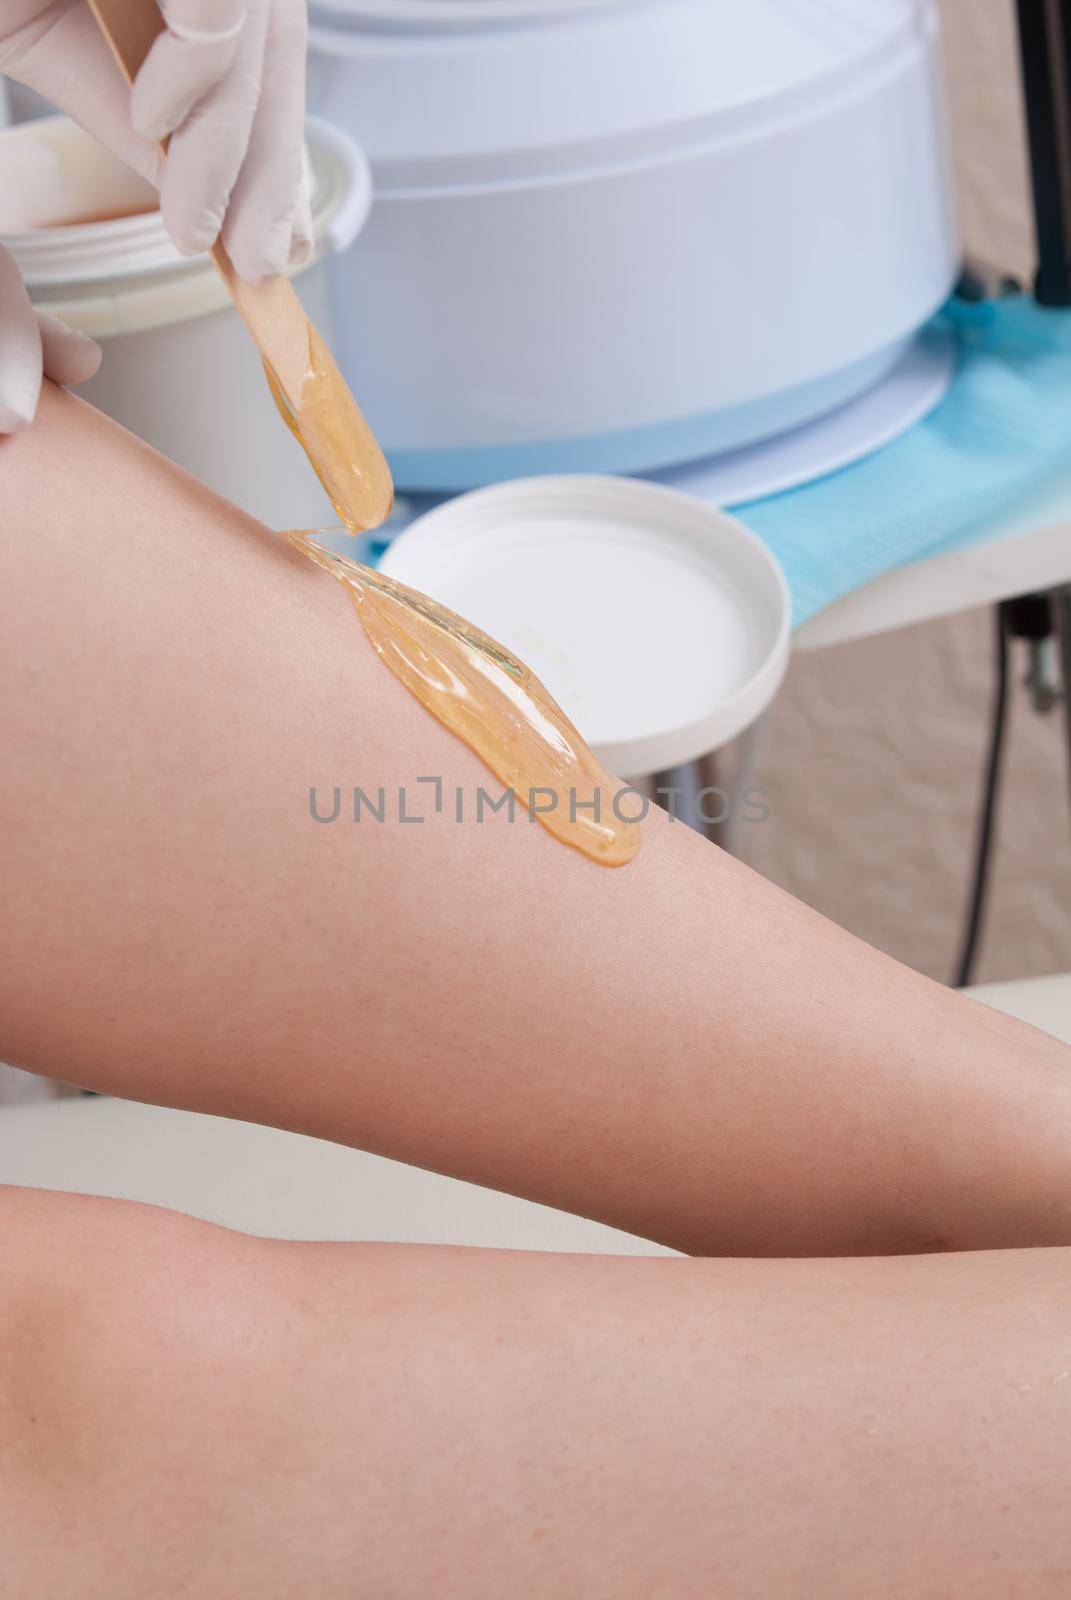 sugaring wax at a professional cosmetologist. High quality photo